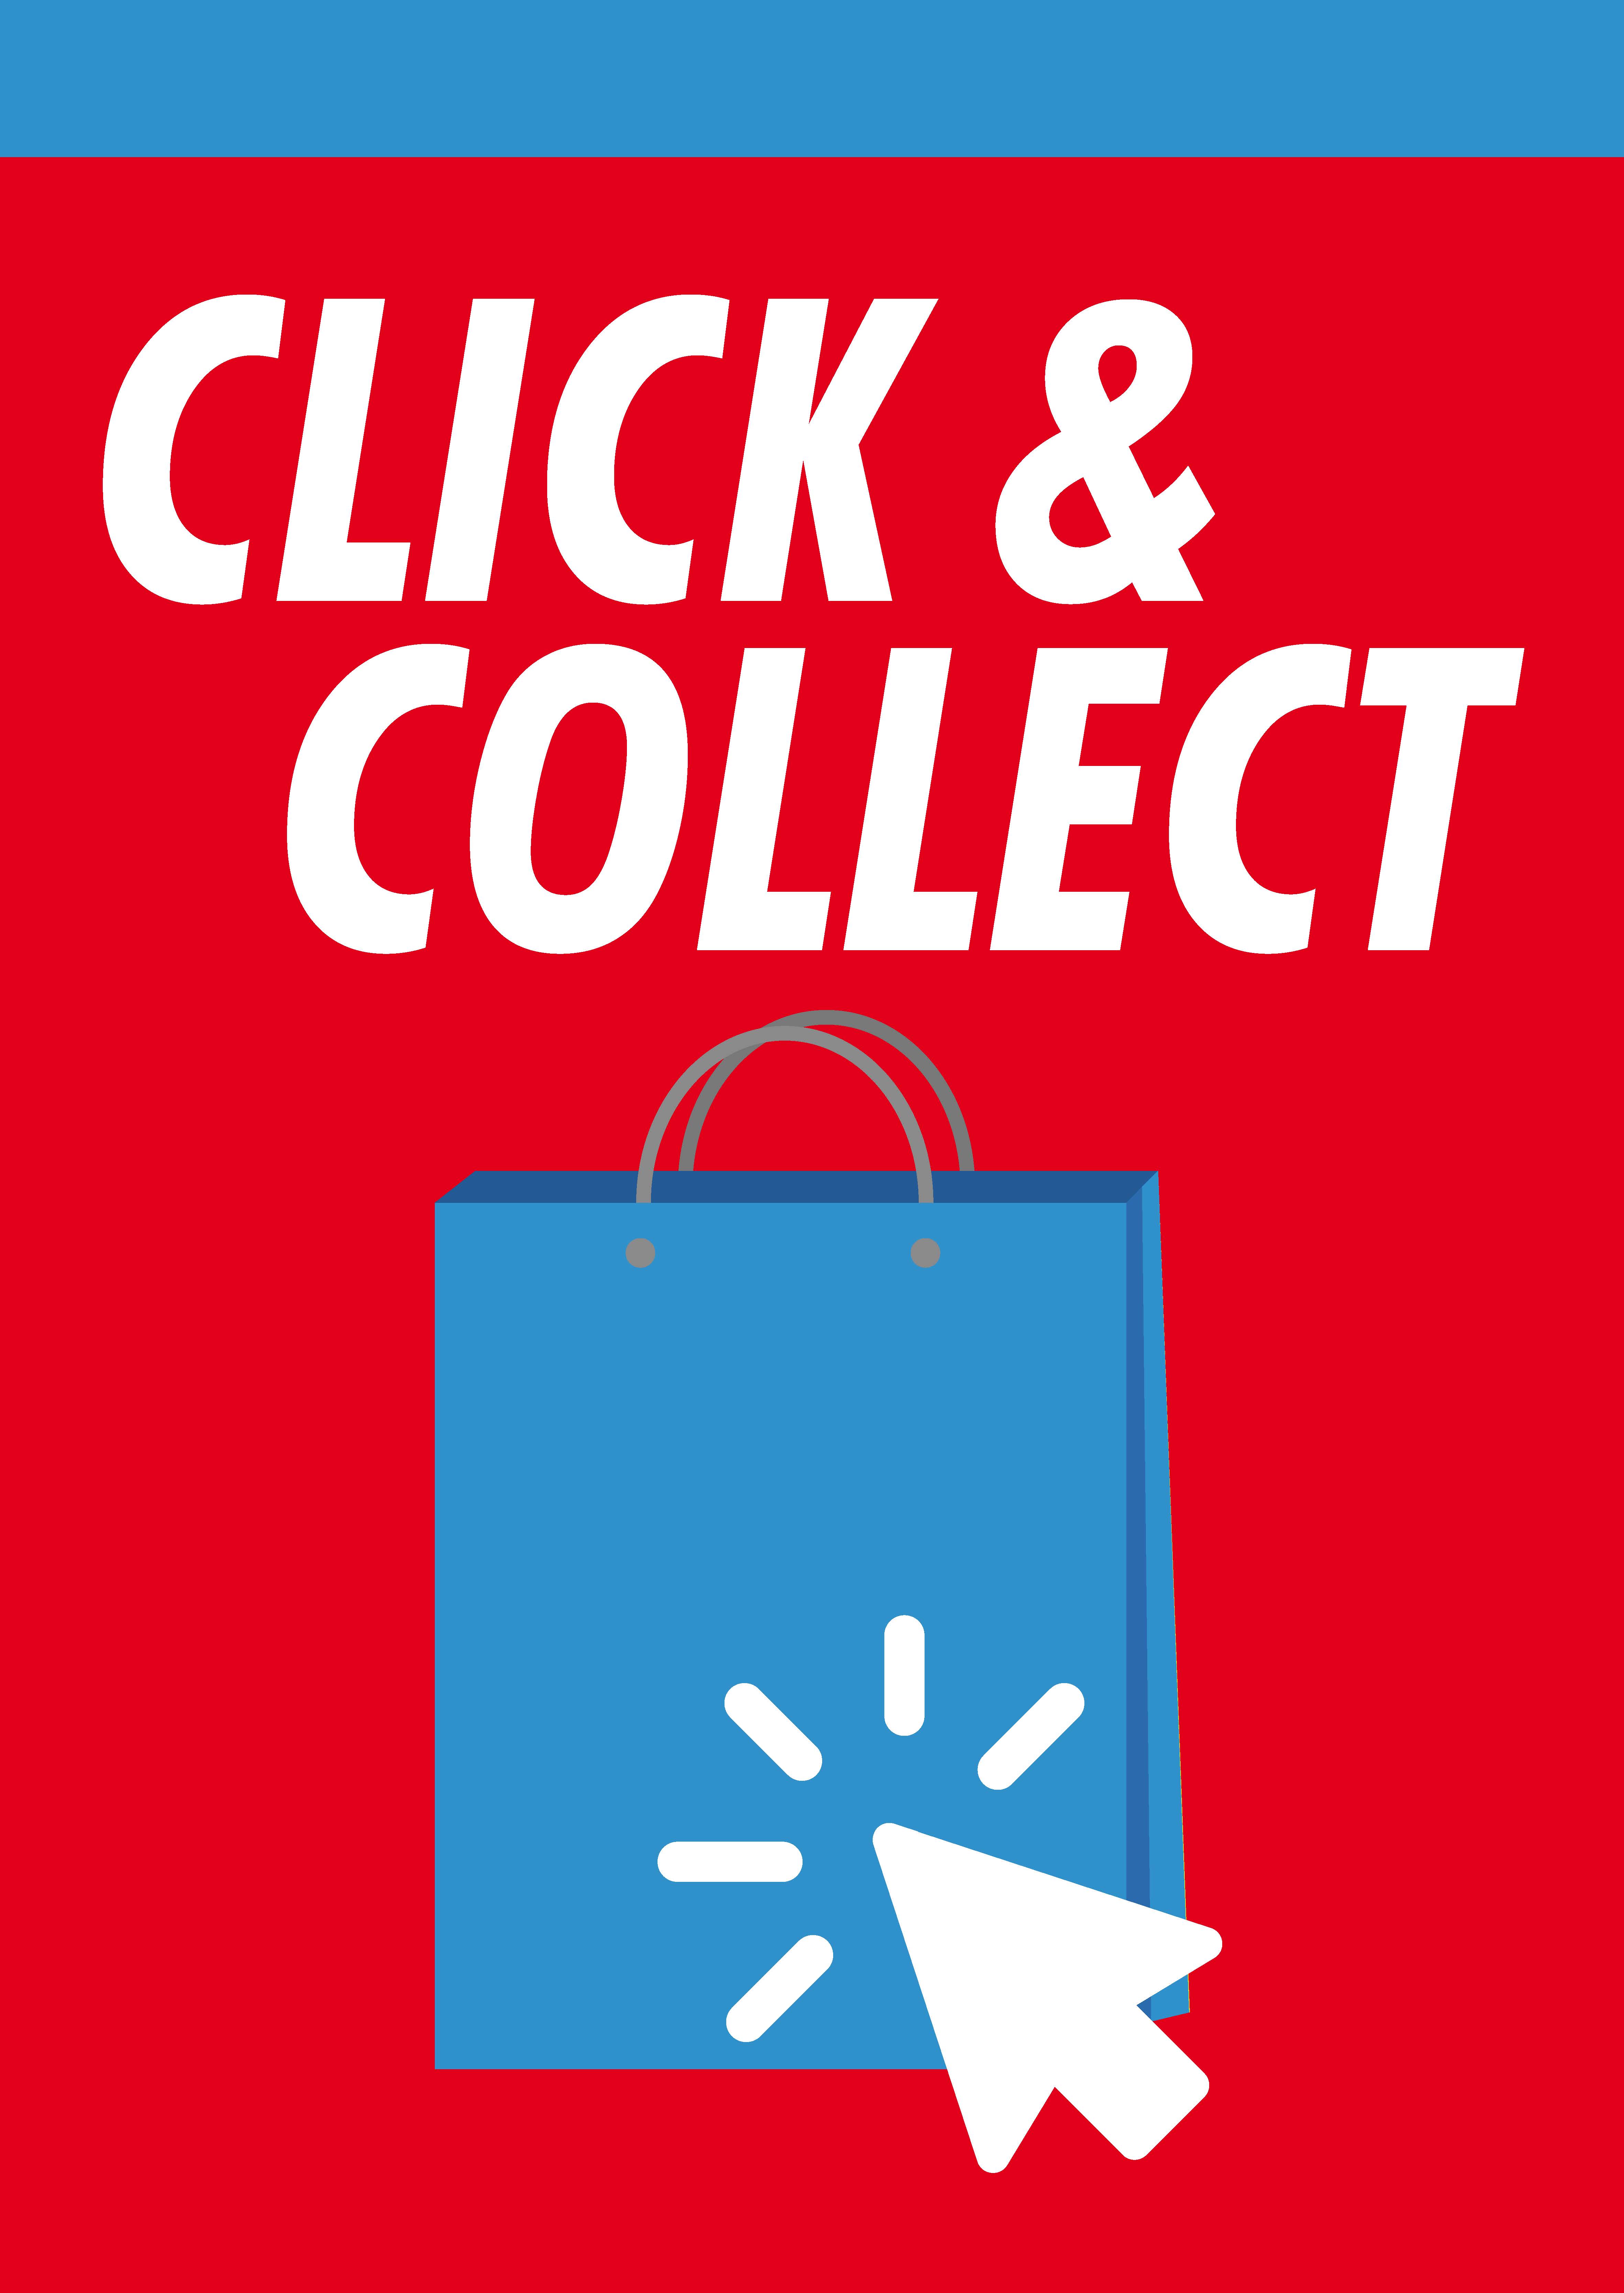 Aktion Corona-Hinweise Click & Collect Vers.1 - PVC-Poster A1 für Kundenstopper